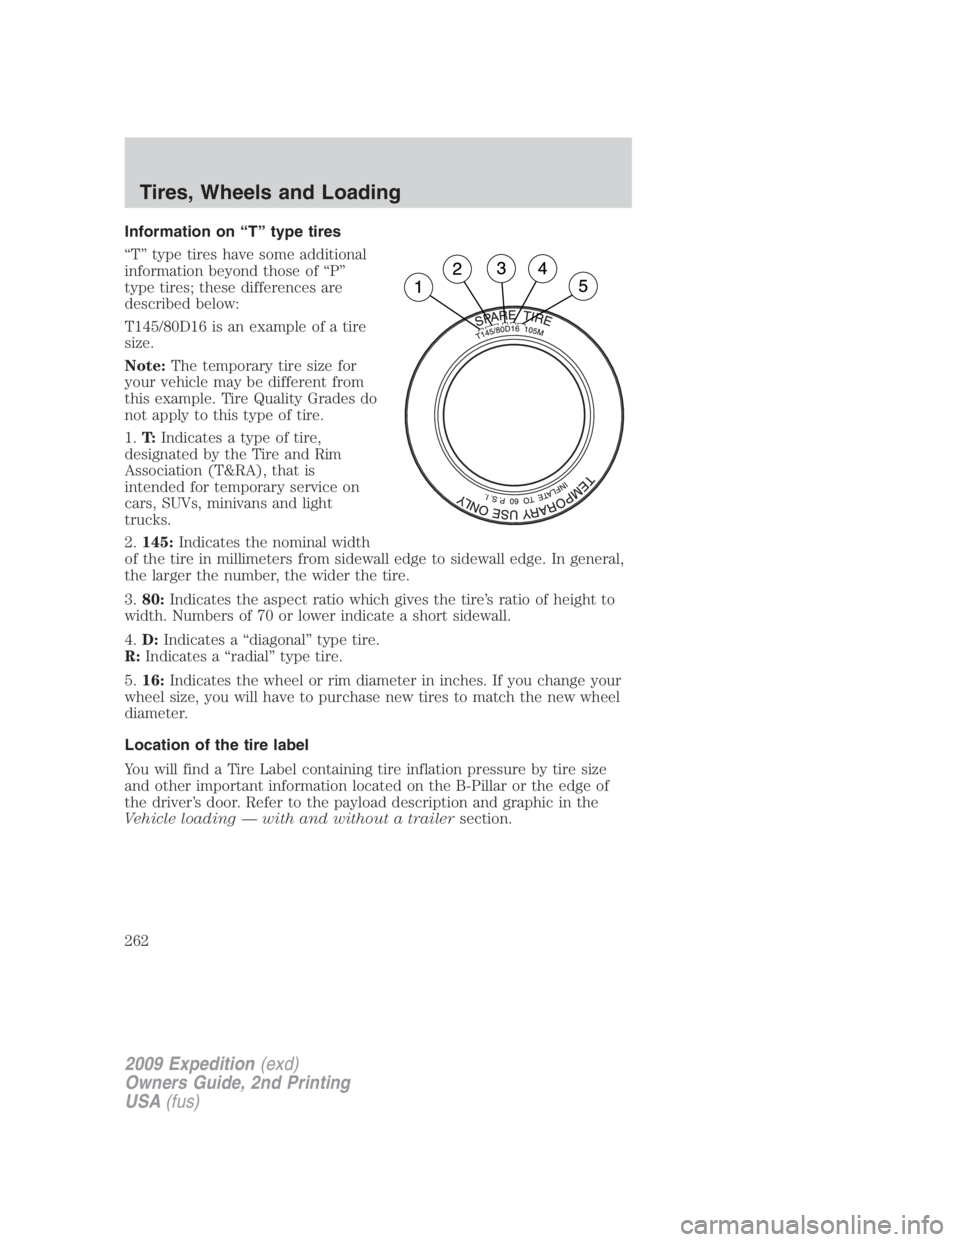 FORD EXPEDITION EL 2009  Owners Manual Information on “T” type tires
“T” type tires have some additional
information beyond those of “P”
type tires; these differences are
described below:
T145/80D16 is an example of a tire
size